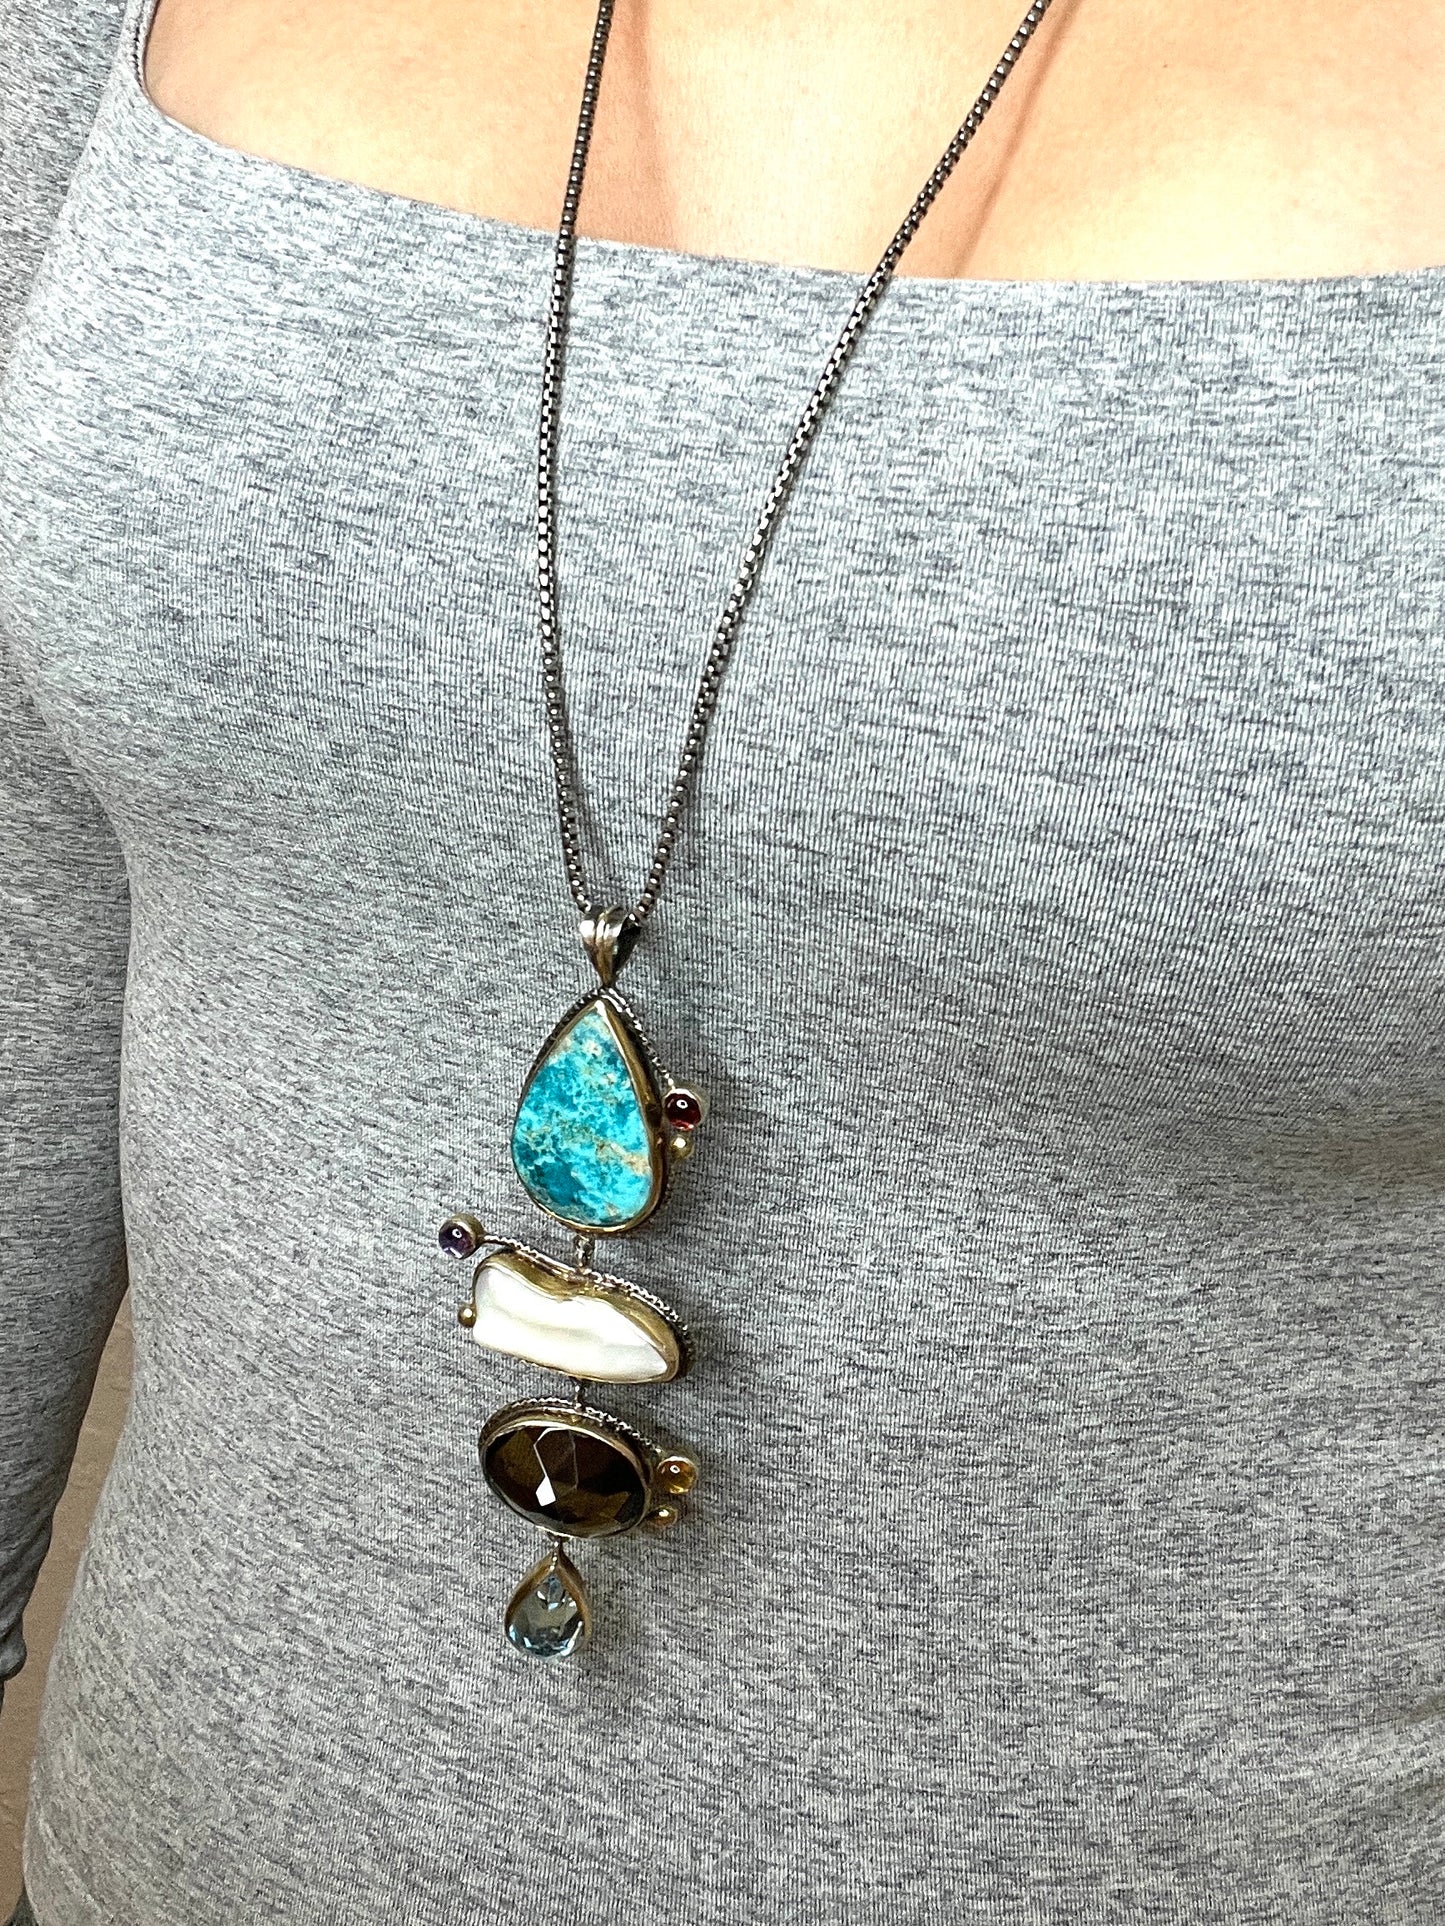 4 Tier Multi Gemstone Turquoise and Pearl Pendant - Born To Glam